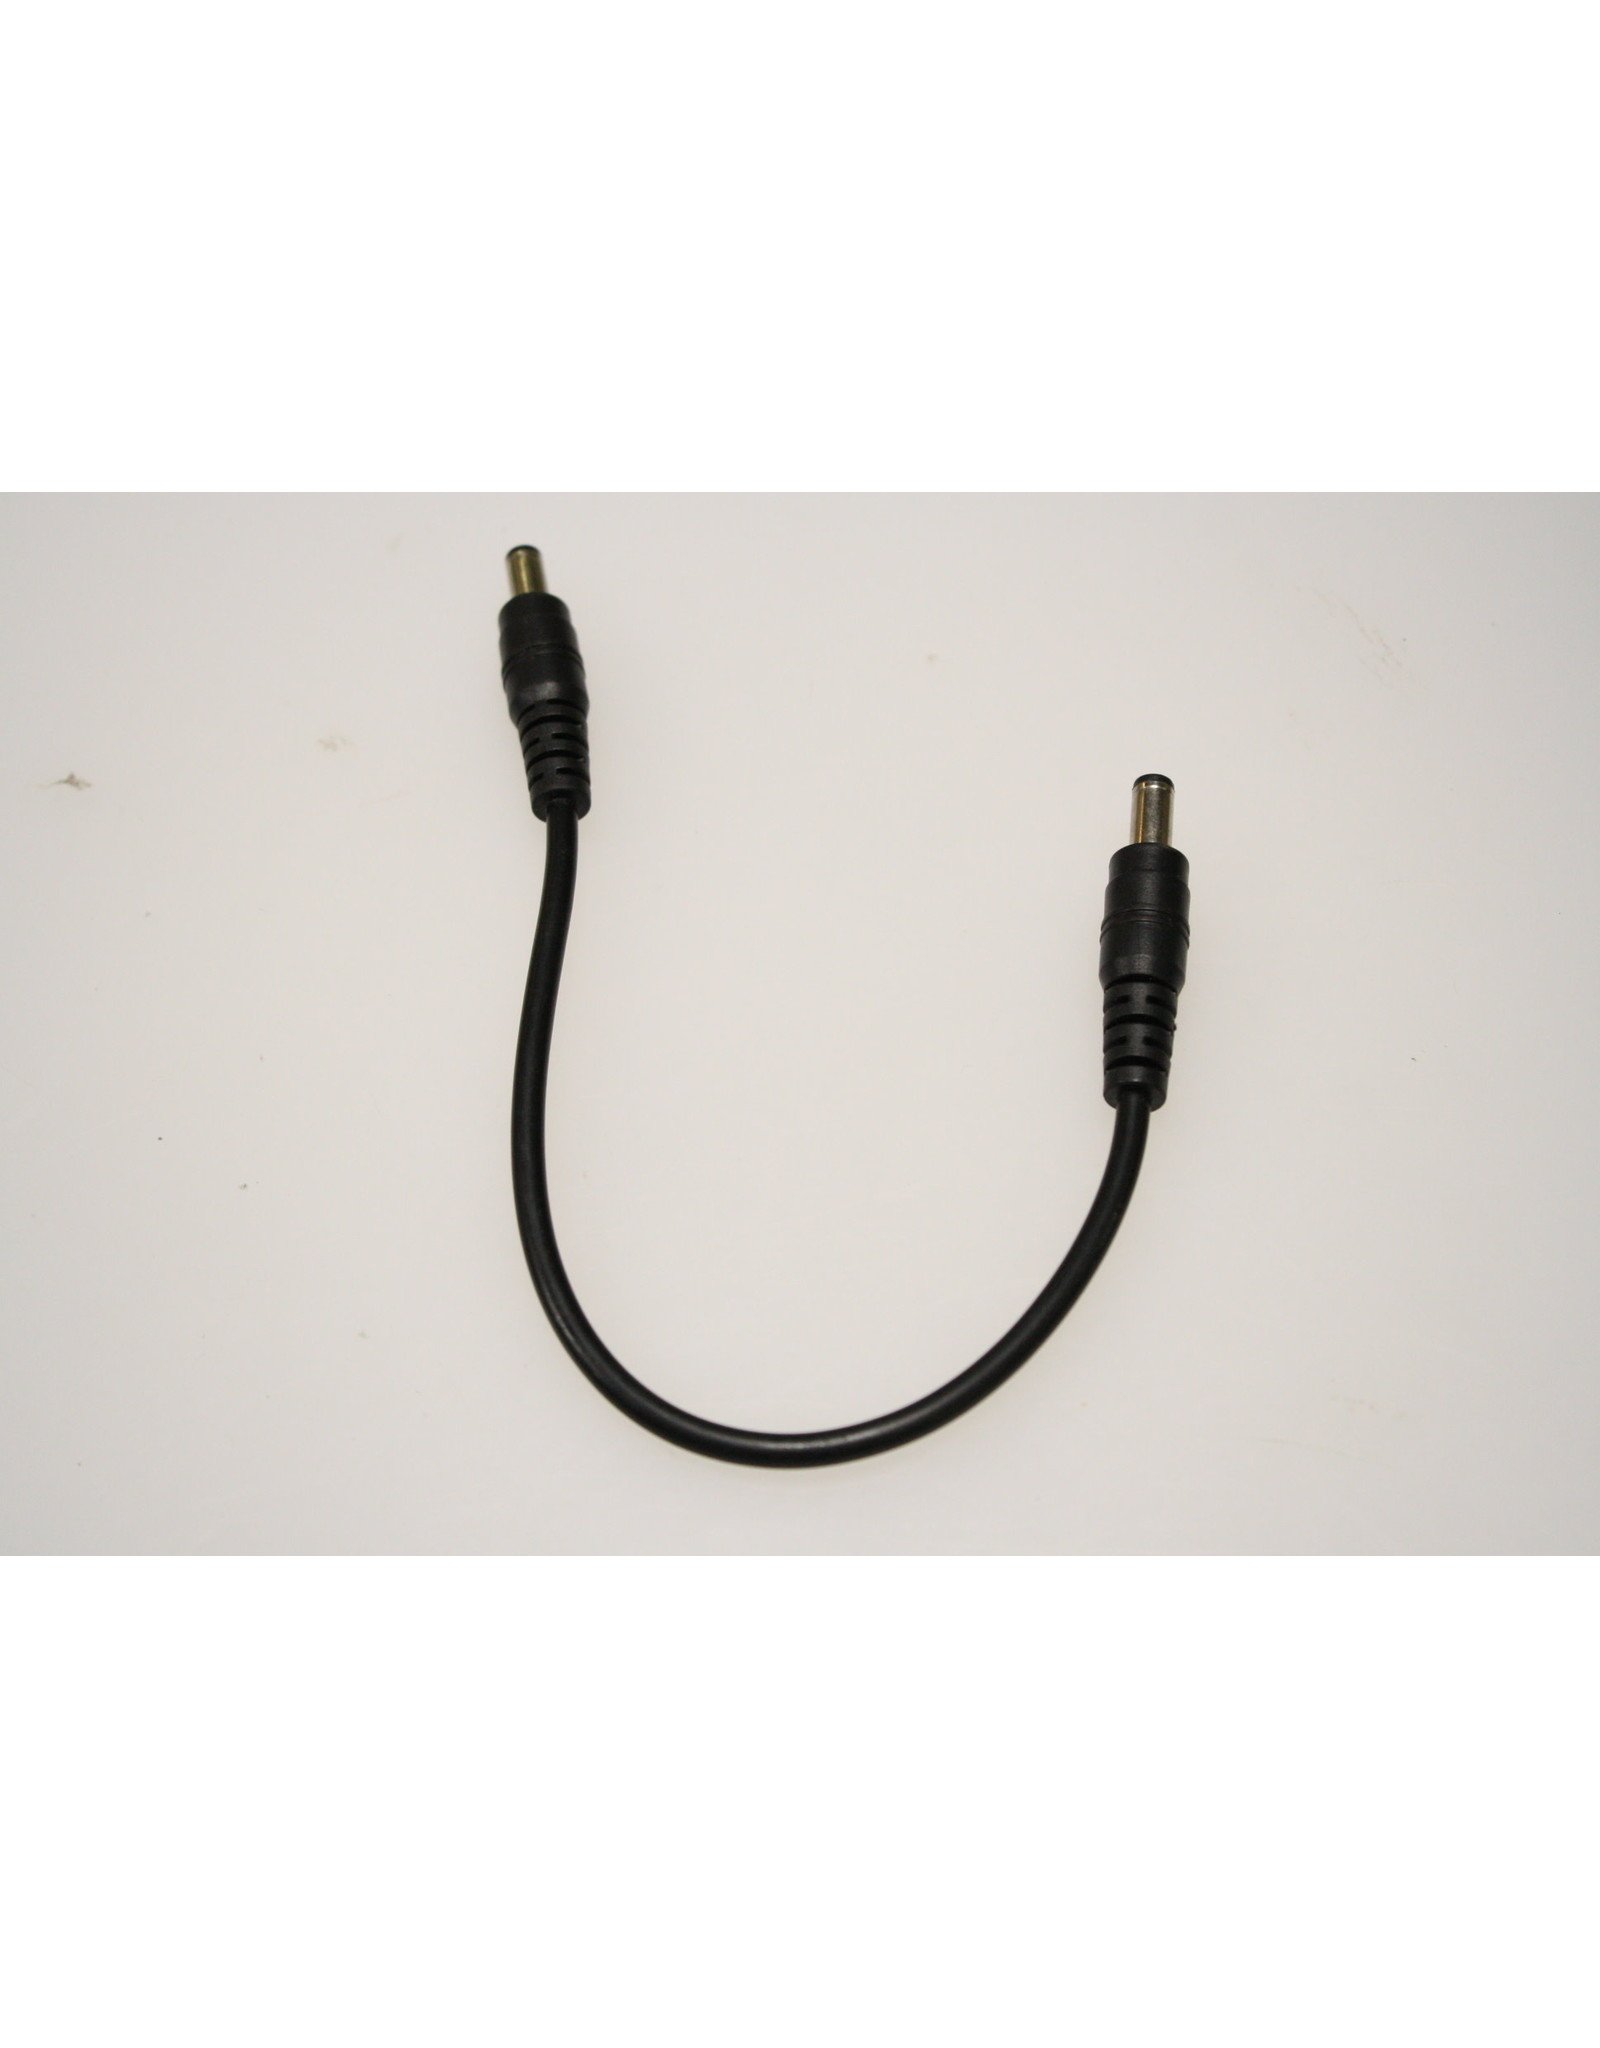 Cable 2.1mm (5 inch length)